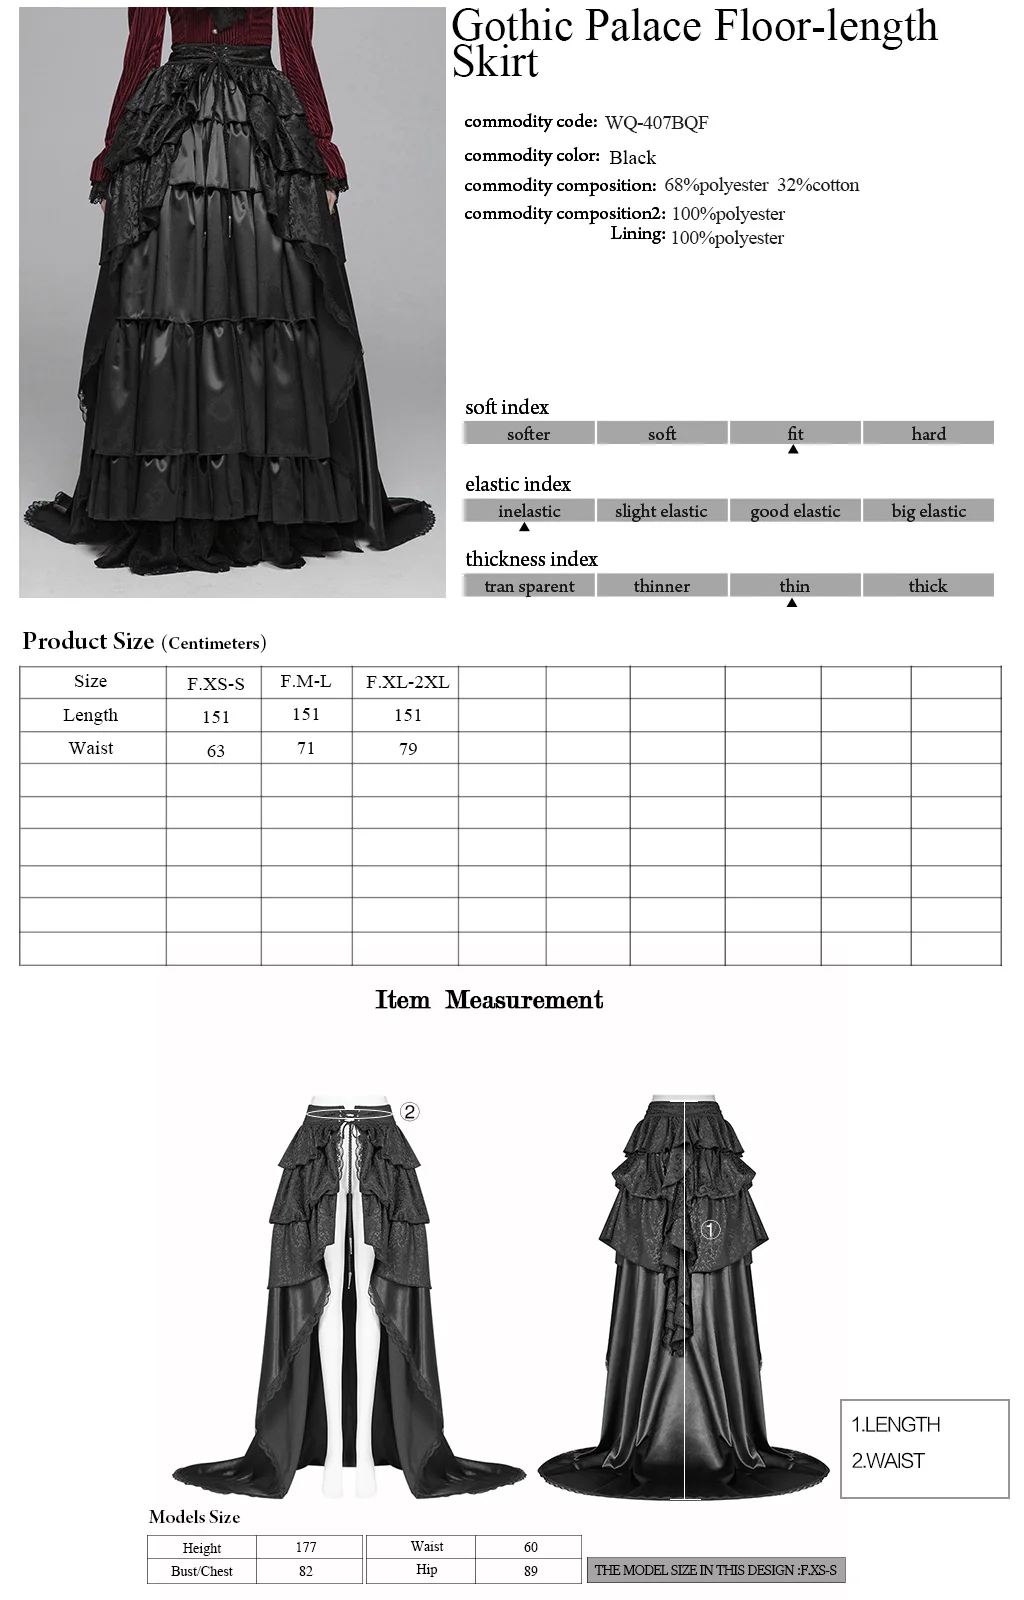 

PUNKRAVE Women's Gothic Palace Floor-Length Skirt Gorgeous Lace-Up Style Mercerized Jacquard Flounce Dinner Banquet Gown Skirts